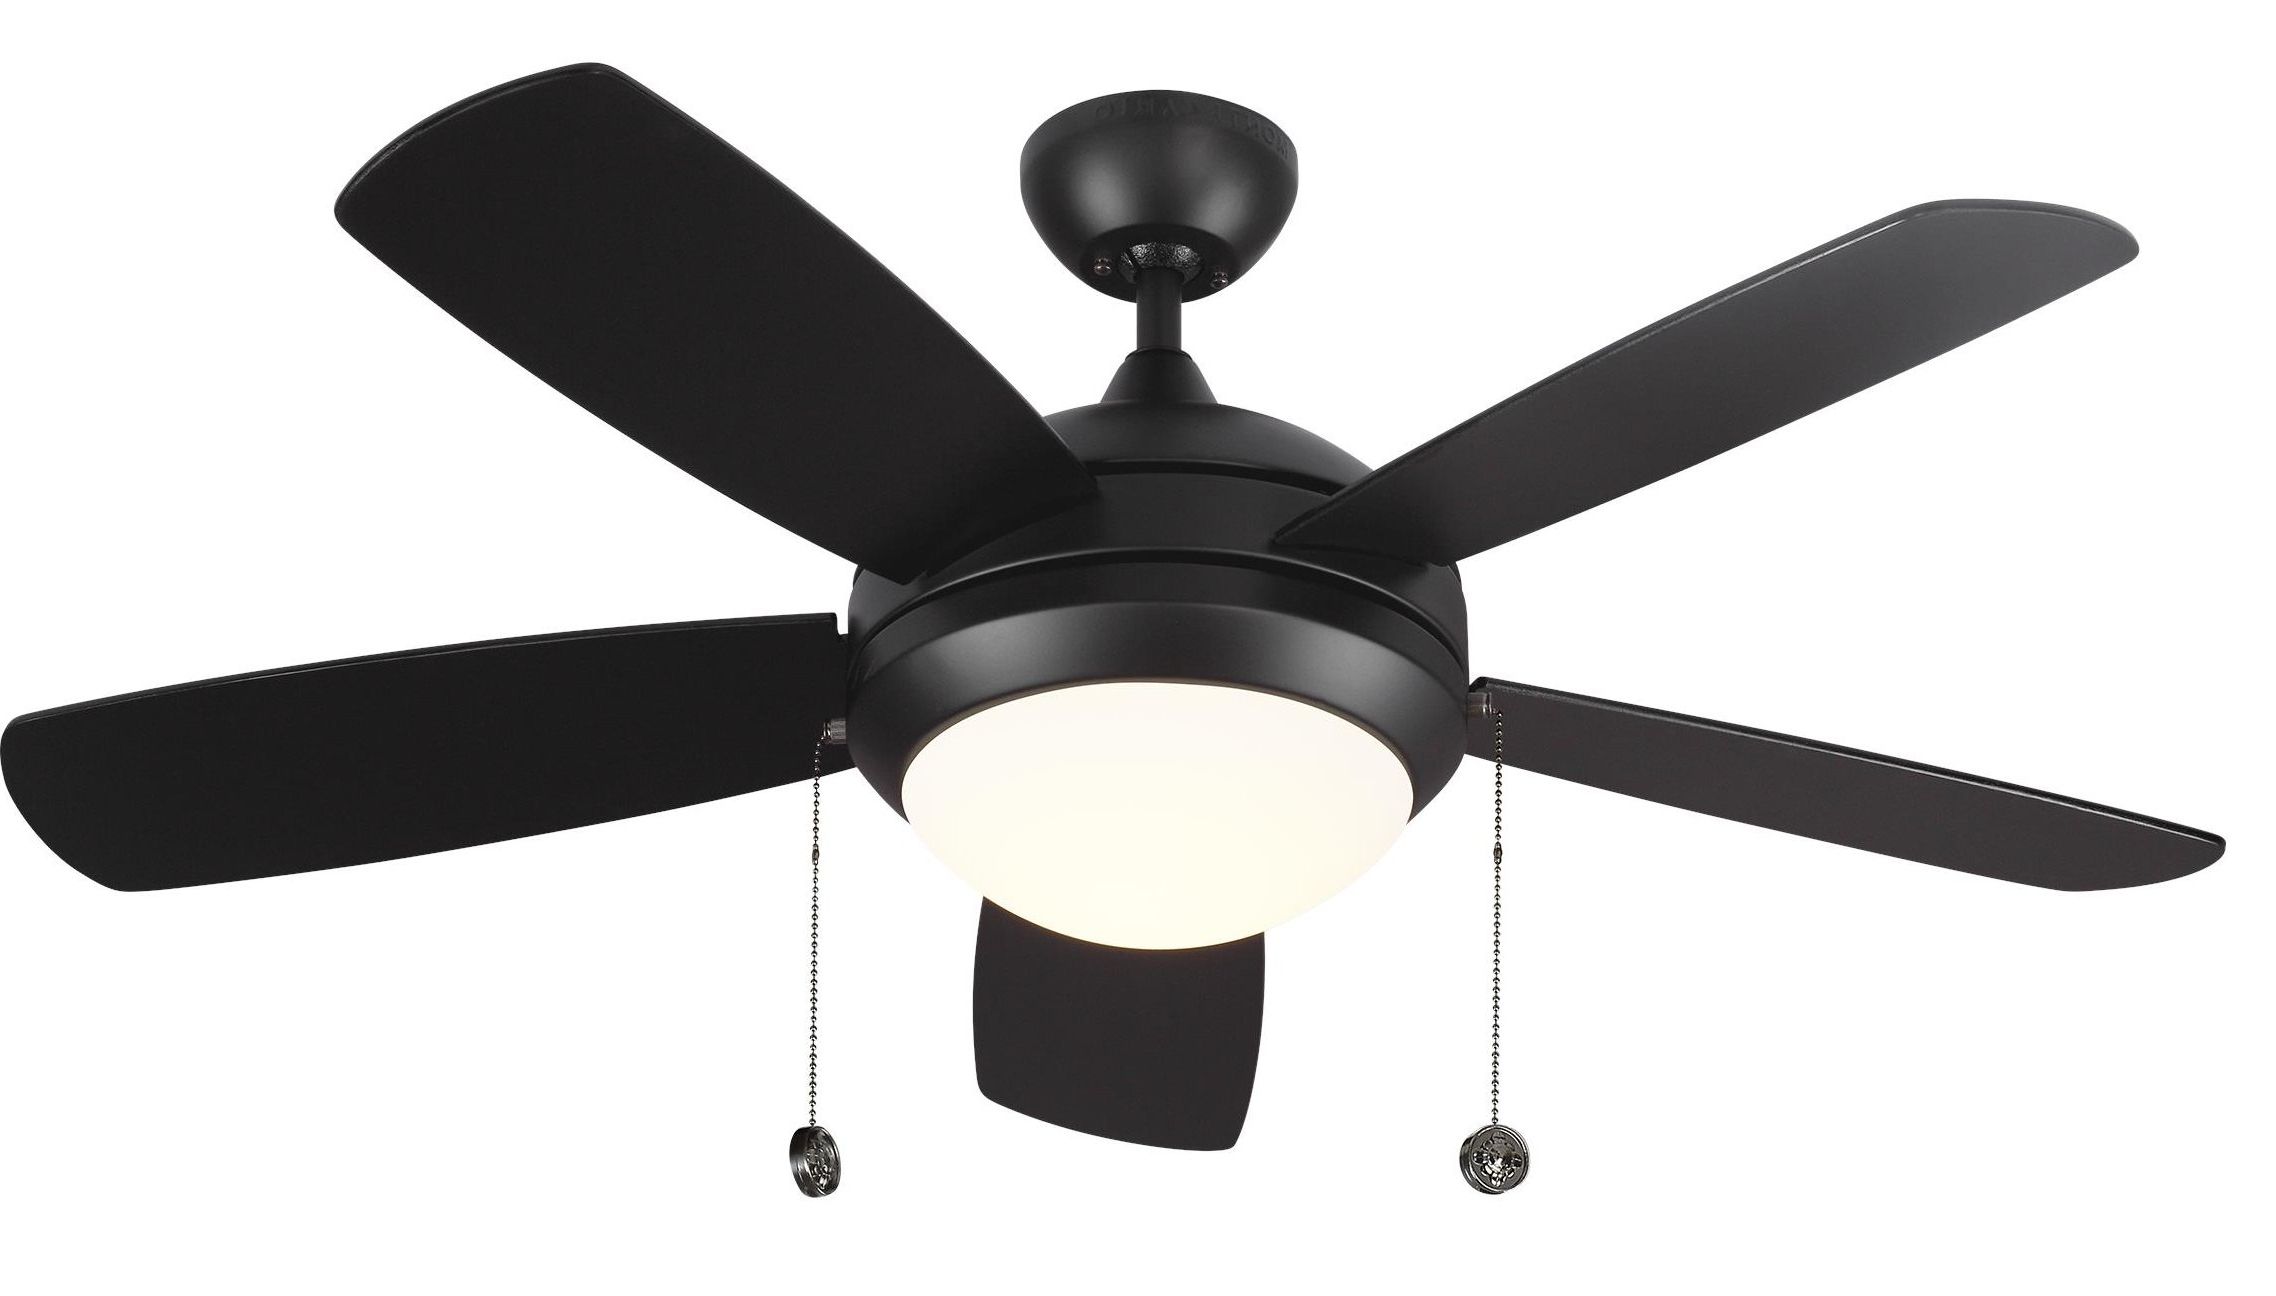 44" Lolington 5 Blade Led Ceiling Fan Throughout Well Known Heskett 3 Blade Led Ceiling Fans (View 9 of 20)